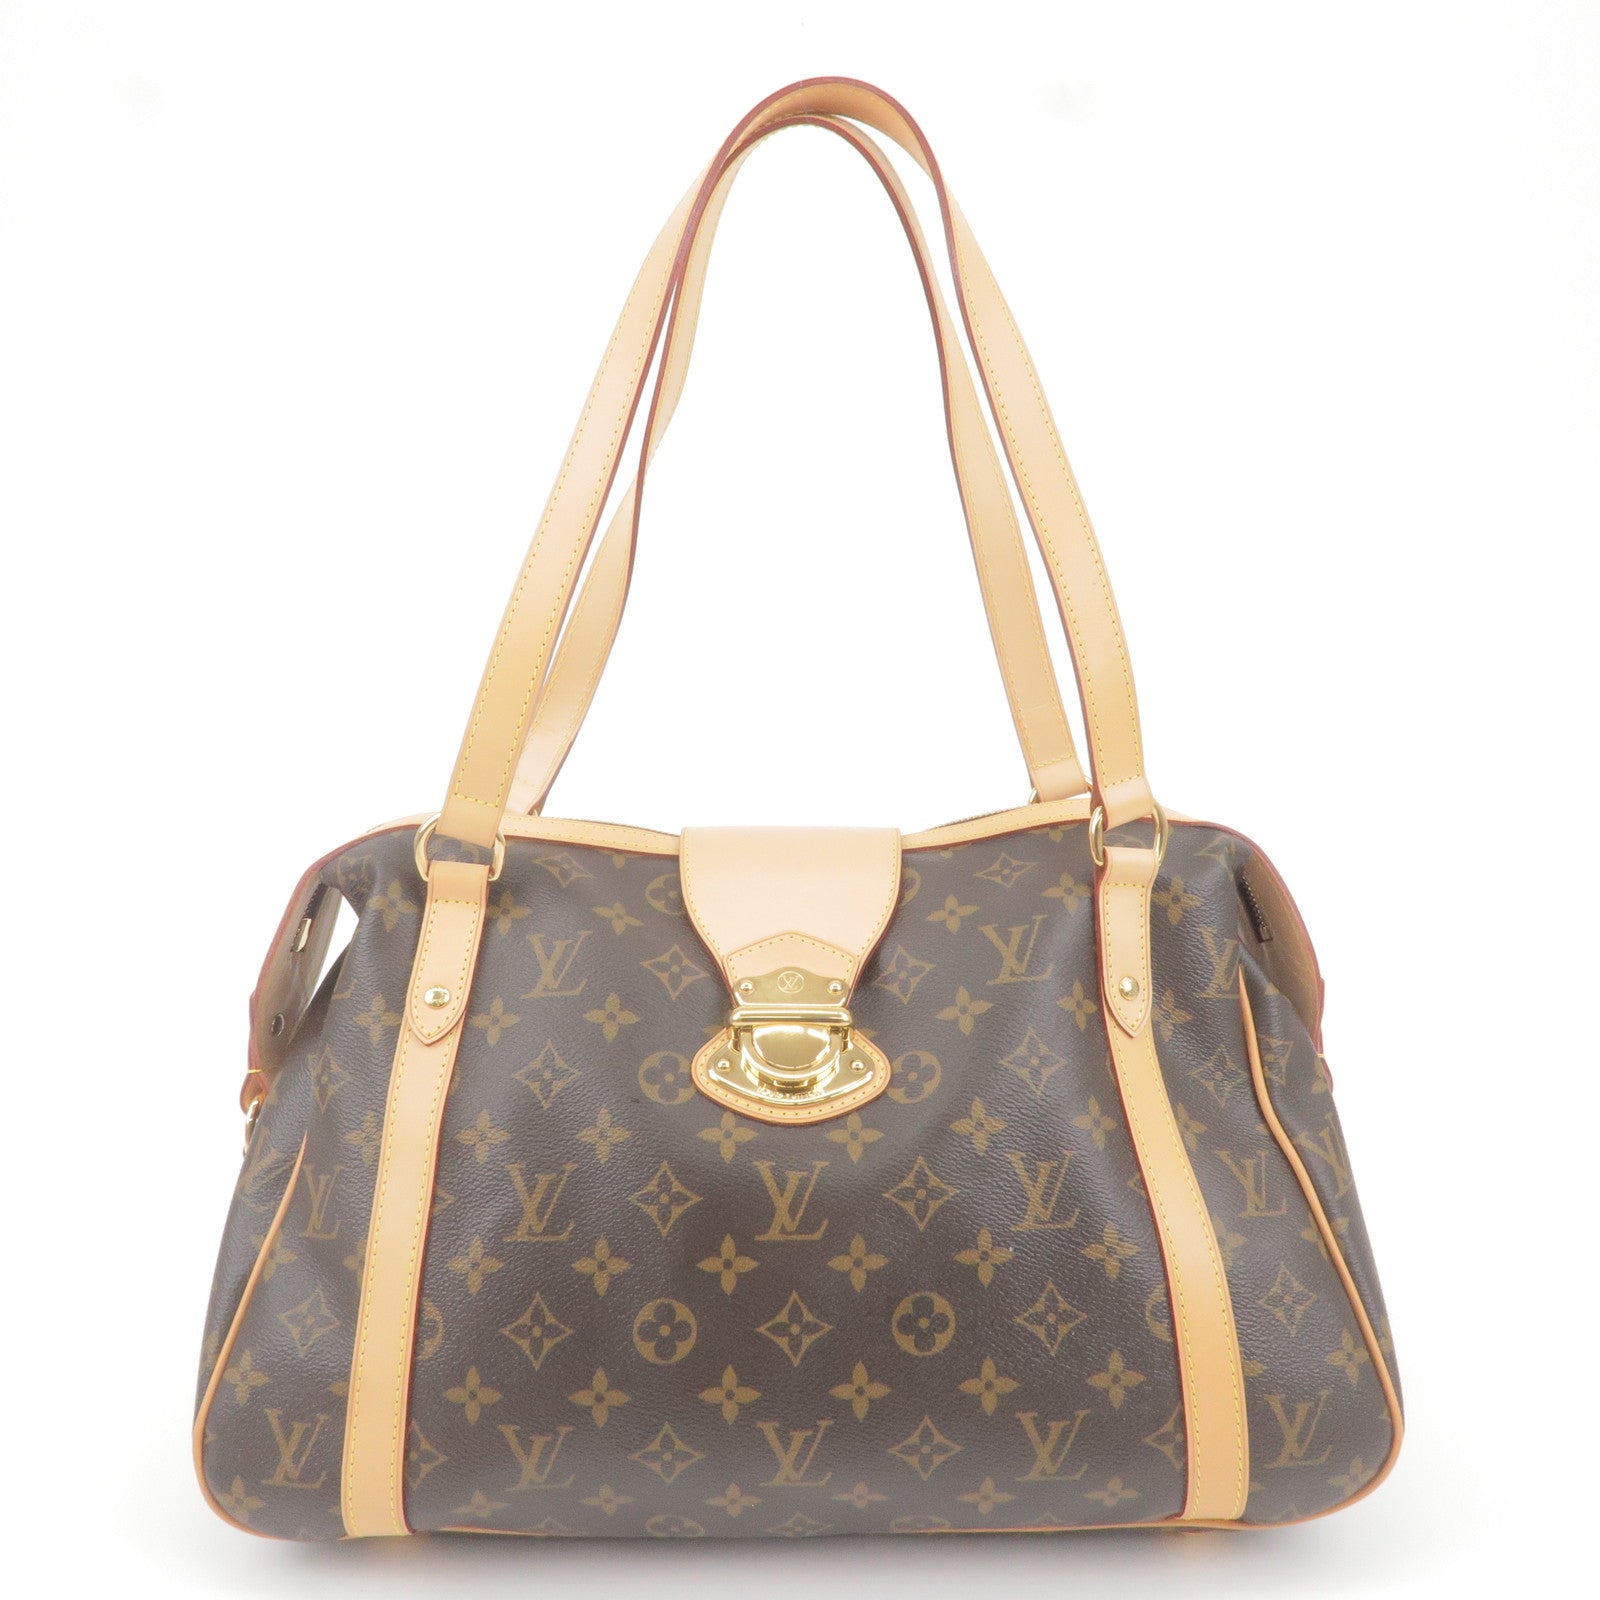 Thoughts on the Triana? : r/Louisvuitton